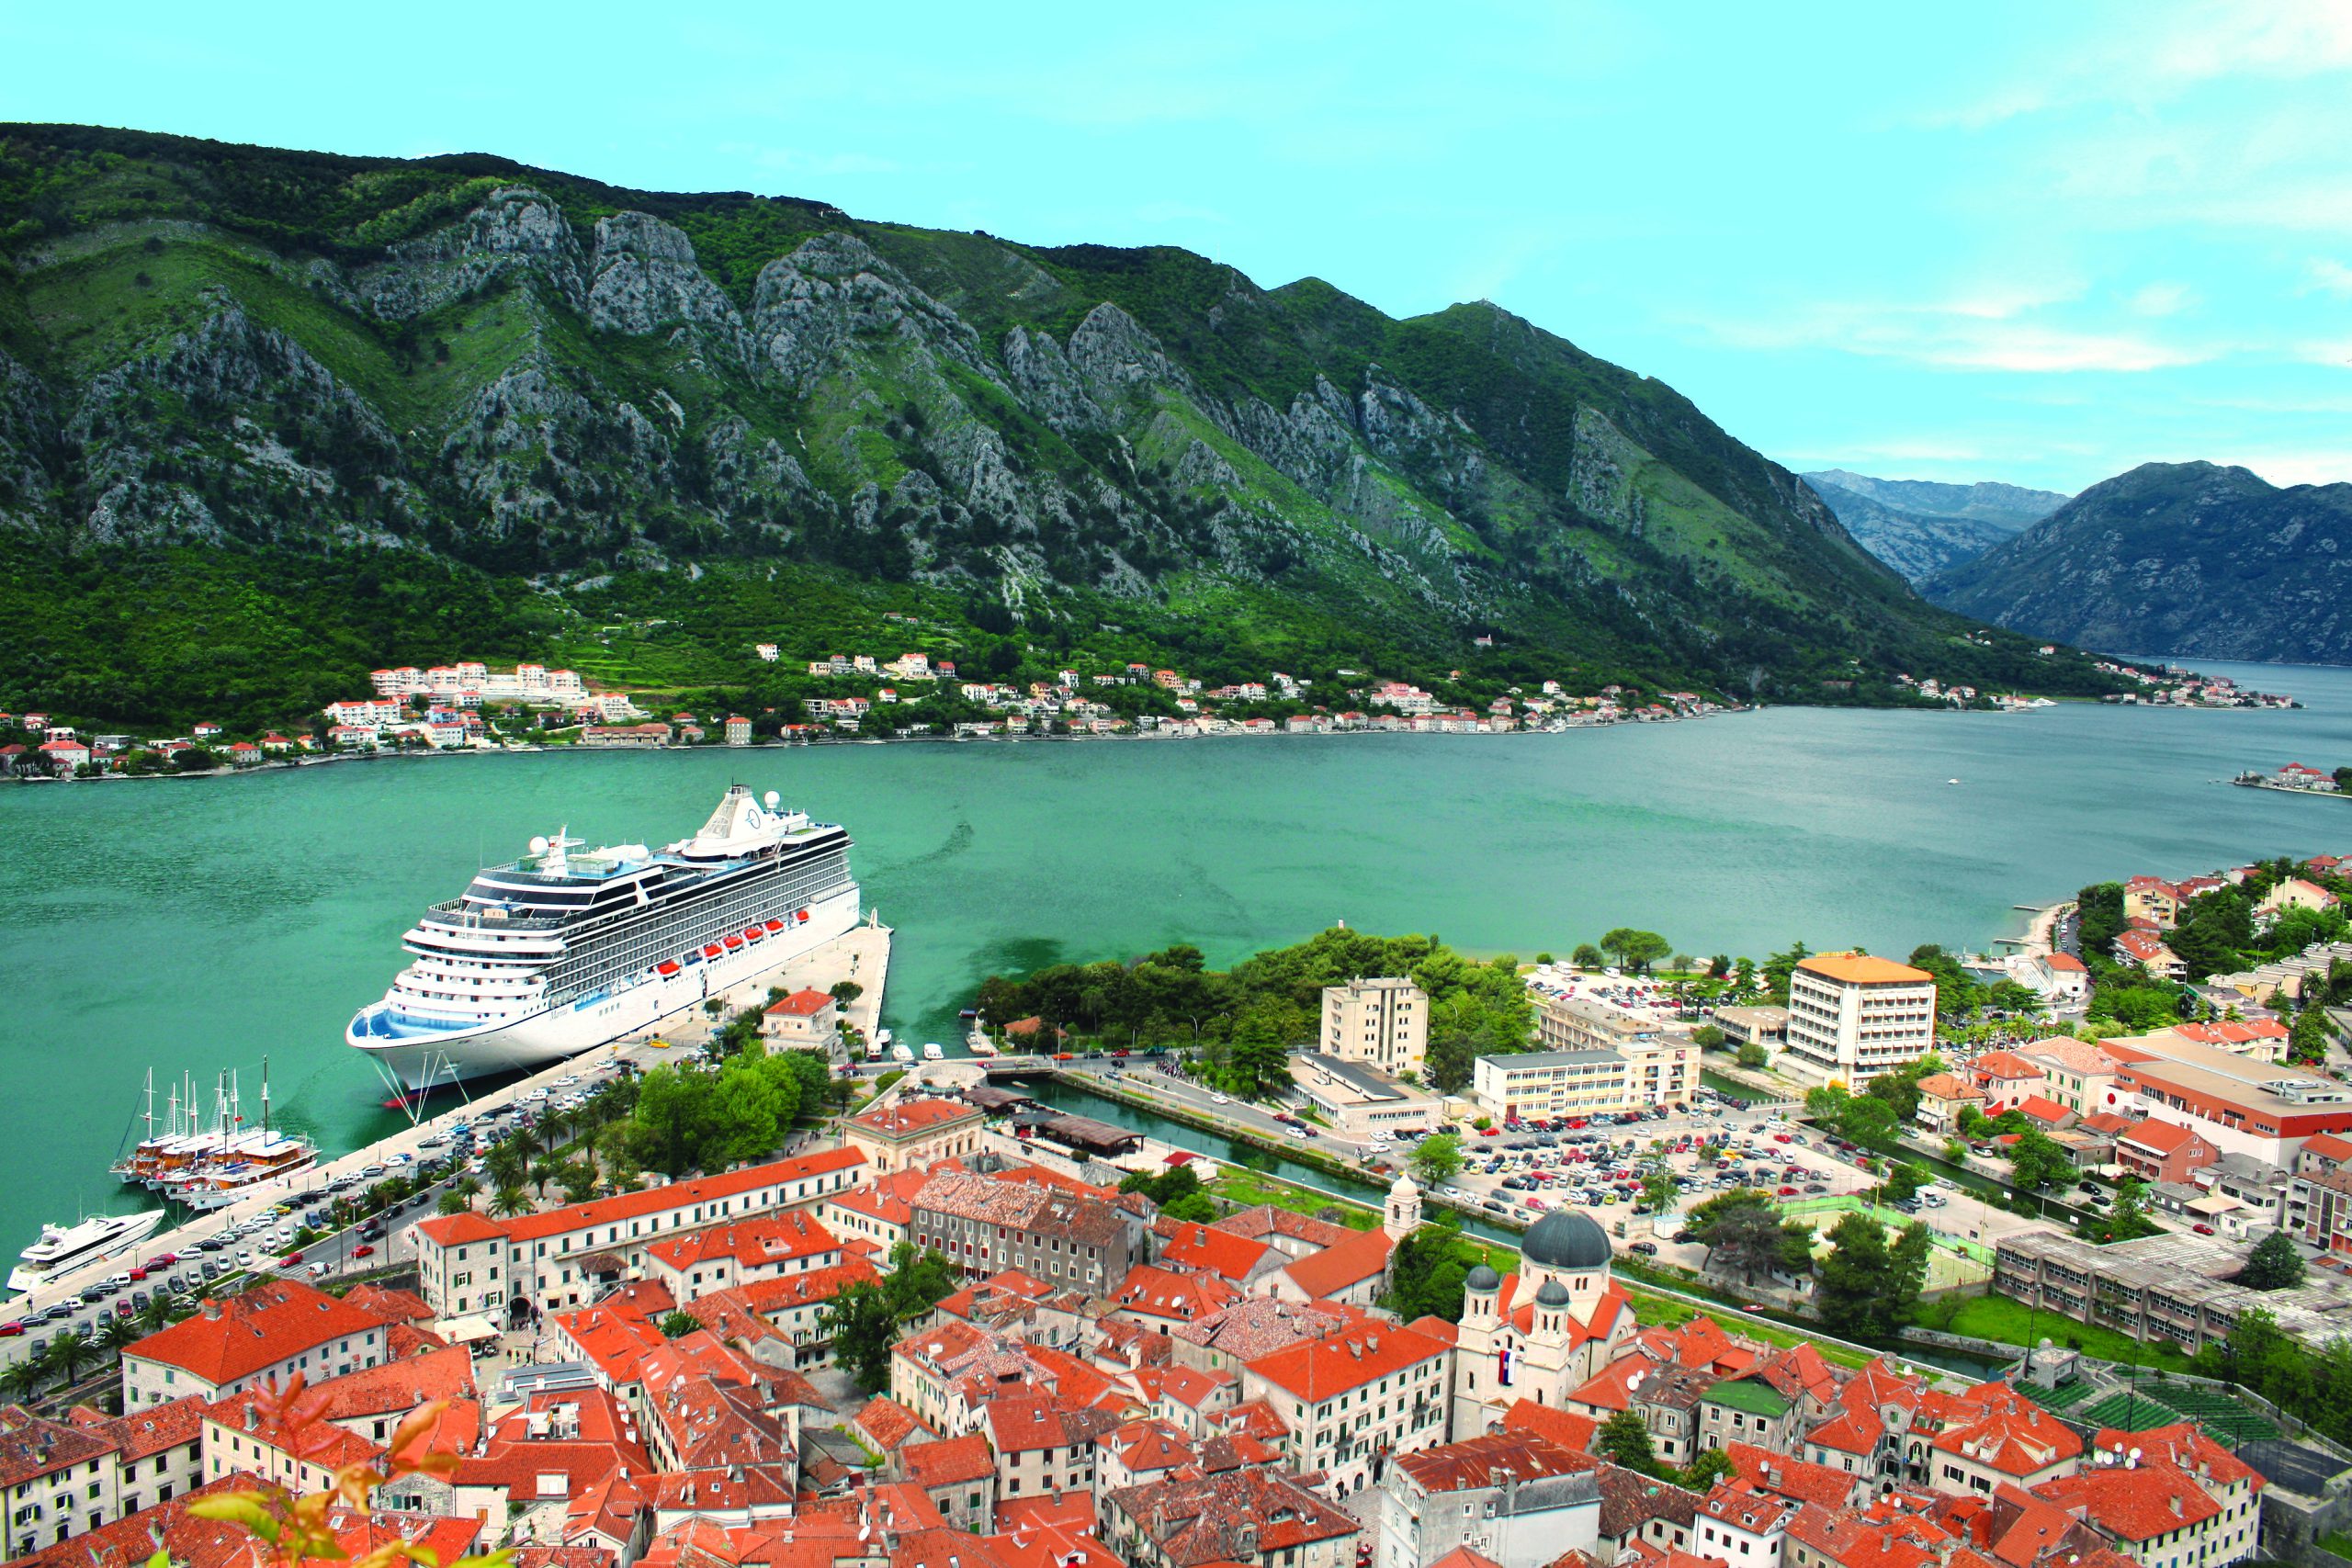 Oceania Cruises' amazing 2022 Europe and North America voyages with 10 new ports